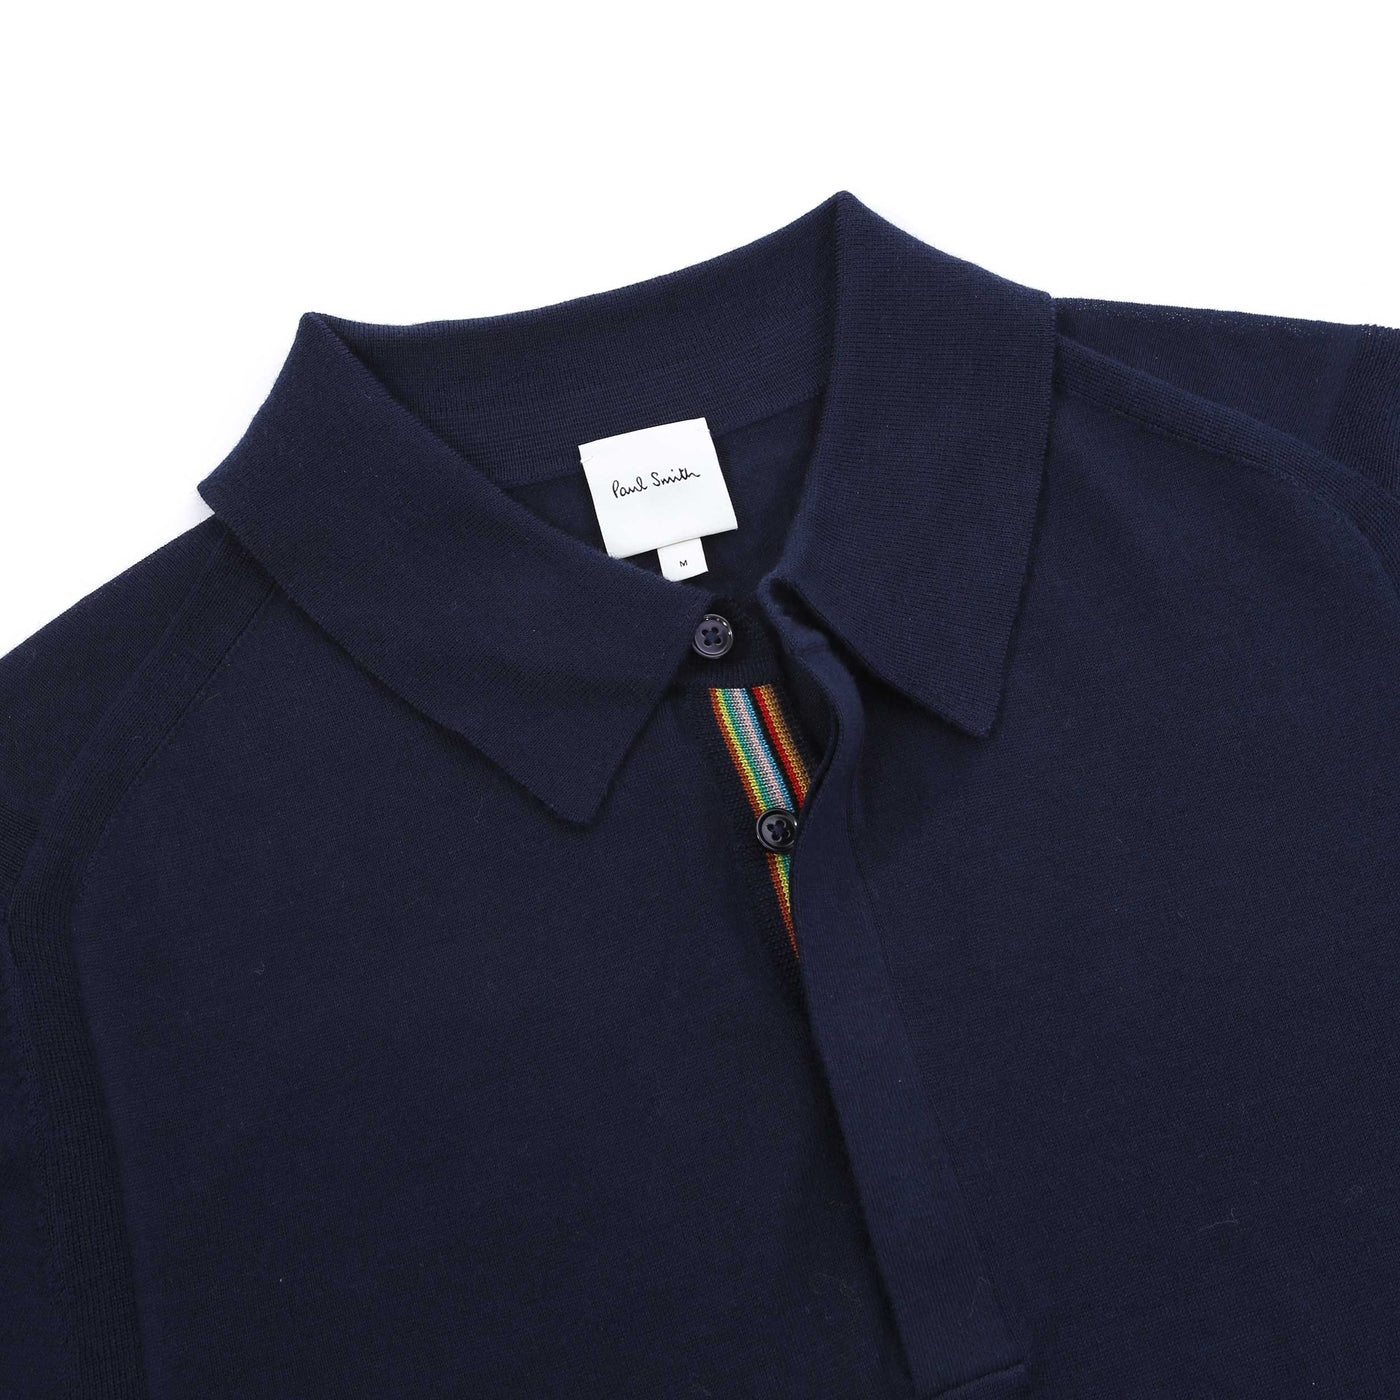 Paul Smith Sweater LS Polo in Navy Collar